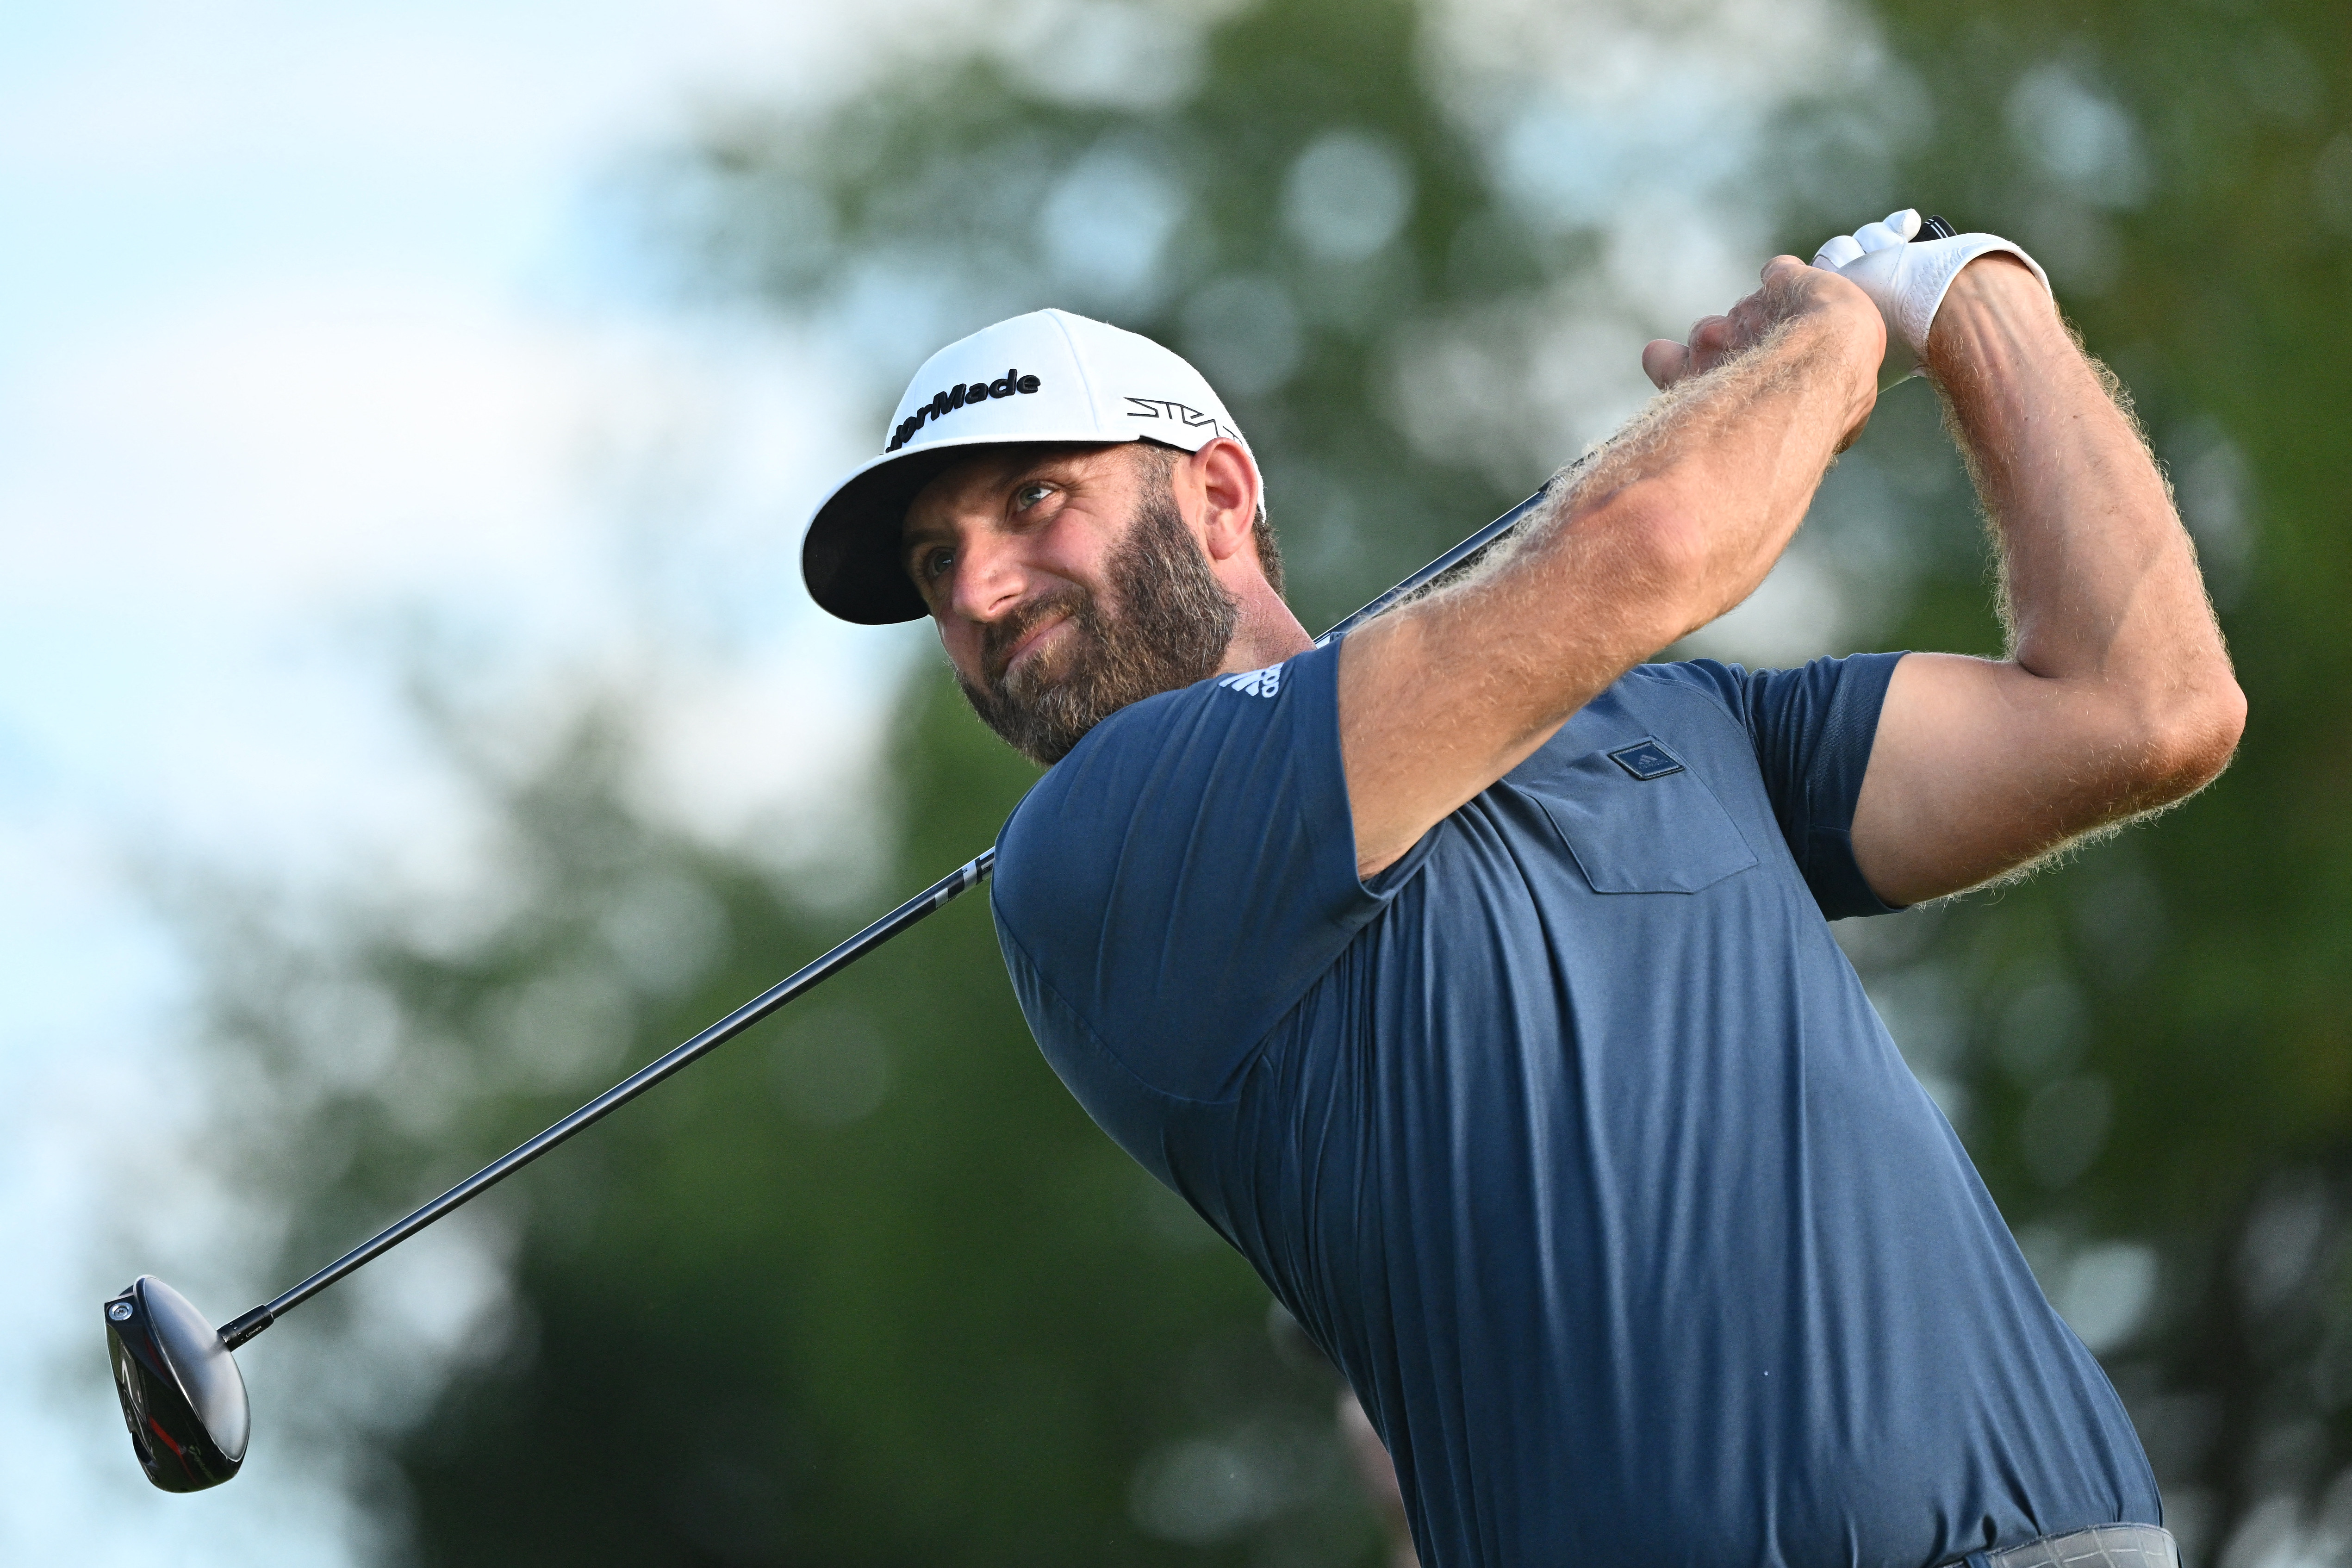 Sep 18, 2022; Chicago, Illinois, USA; Dustin Johnson tees off from the 18th tee box during the final round of the Invitational Chicago LIV Golf tournament at Rich Harvest Farms. Mandatory Credit: Jamie Sabau-USA TODAY Sports